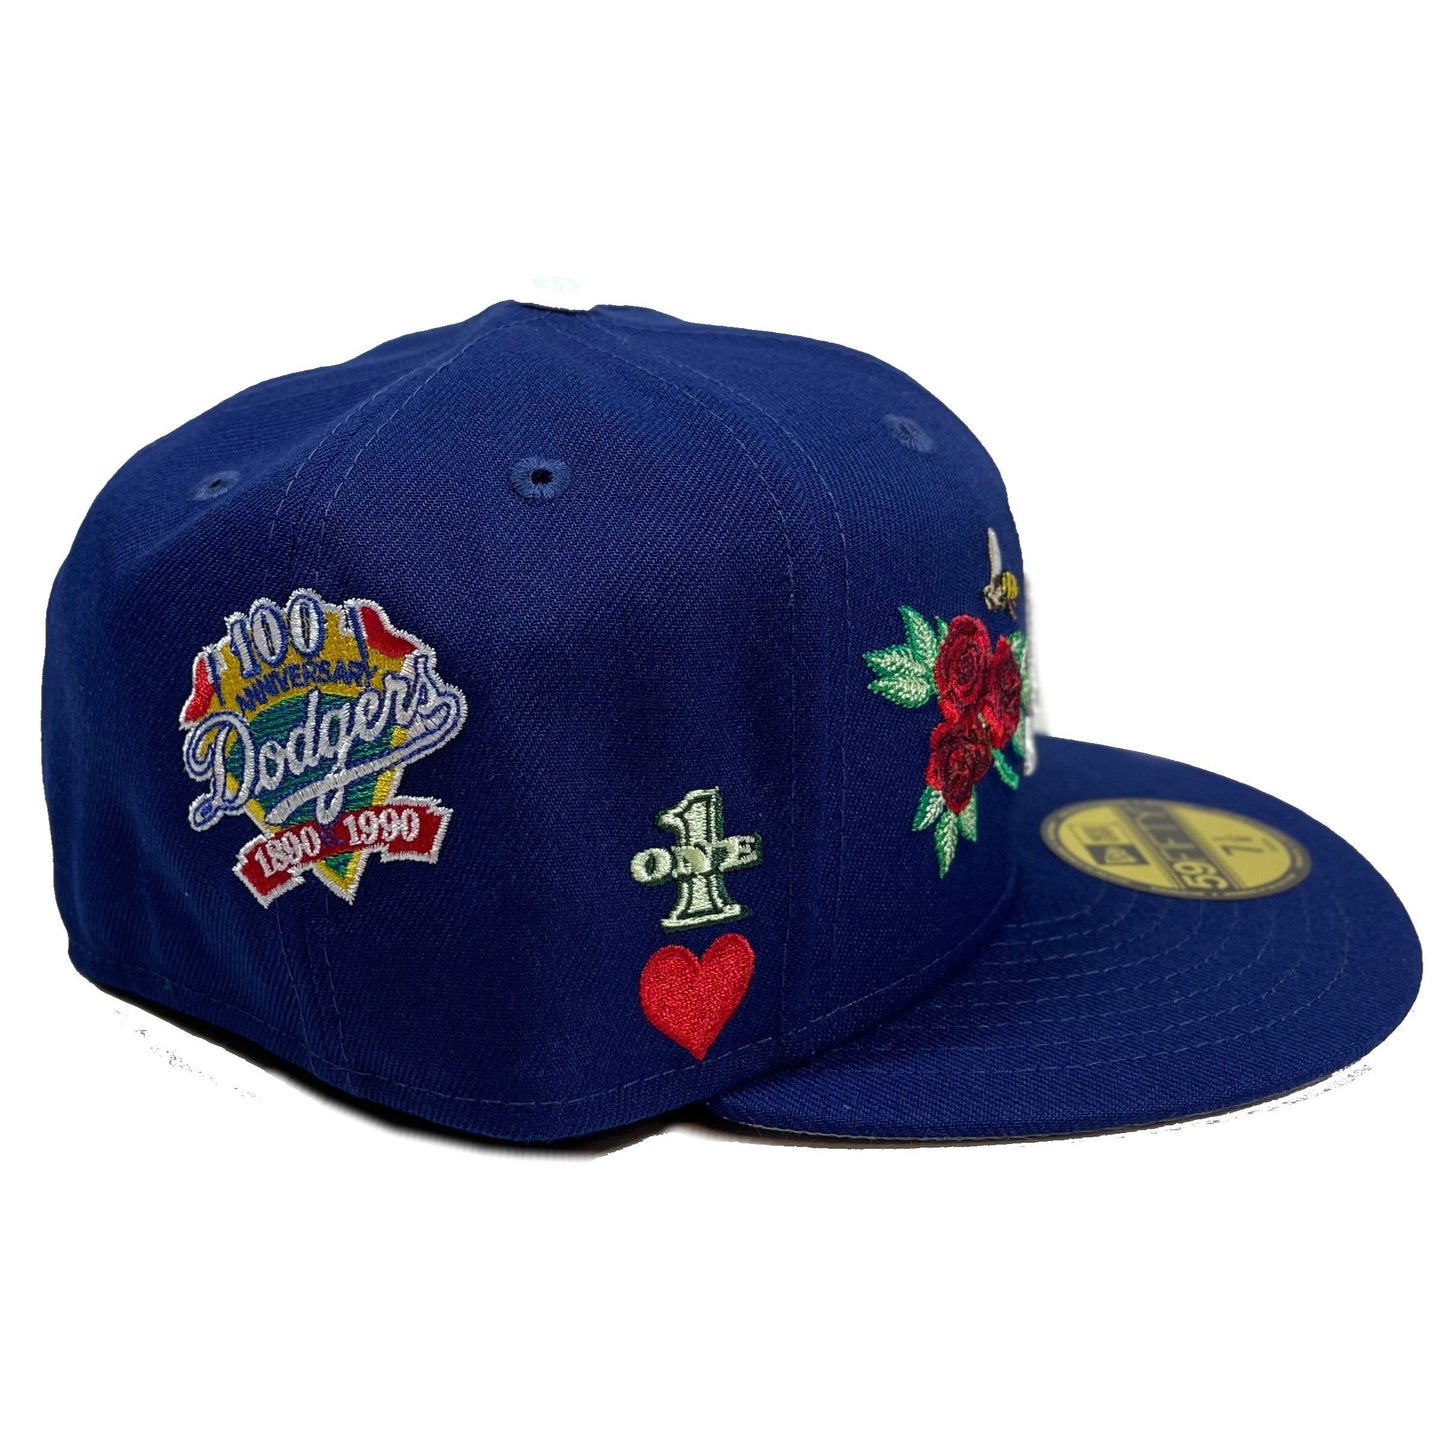 Los Angeles Dodgers Patches (Blue) Fitted